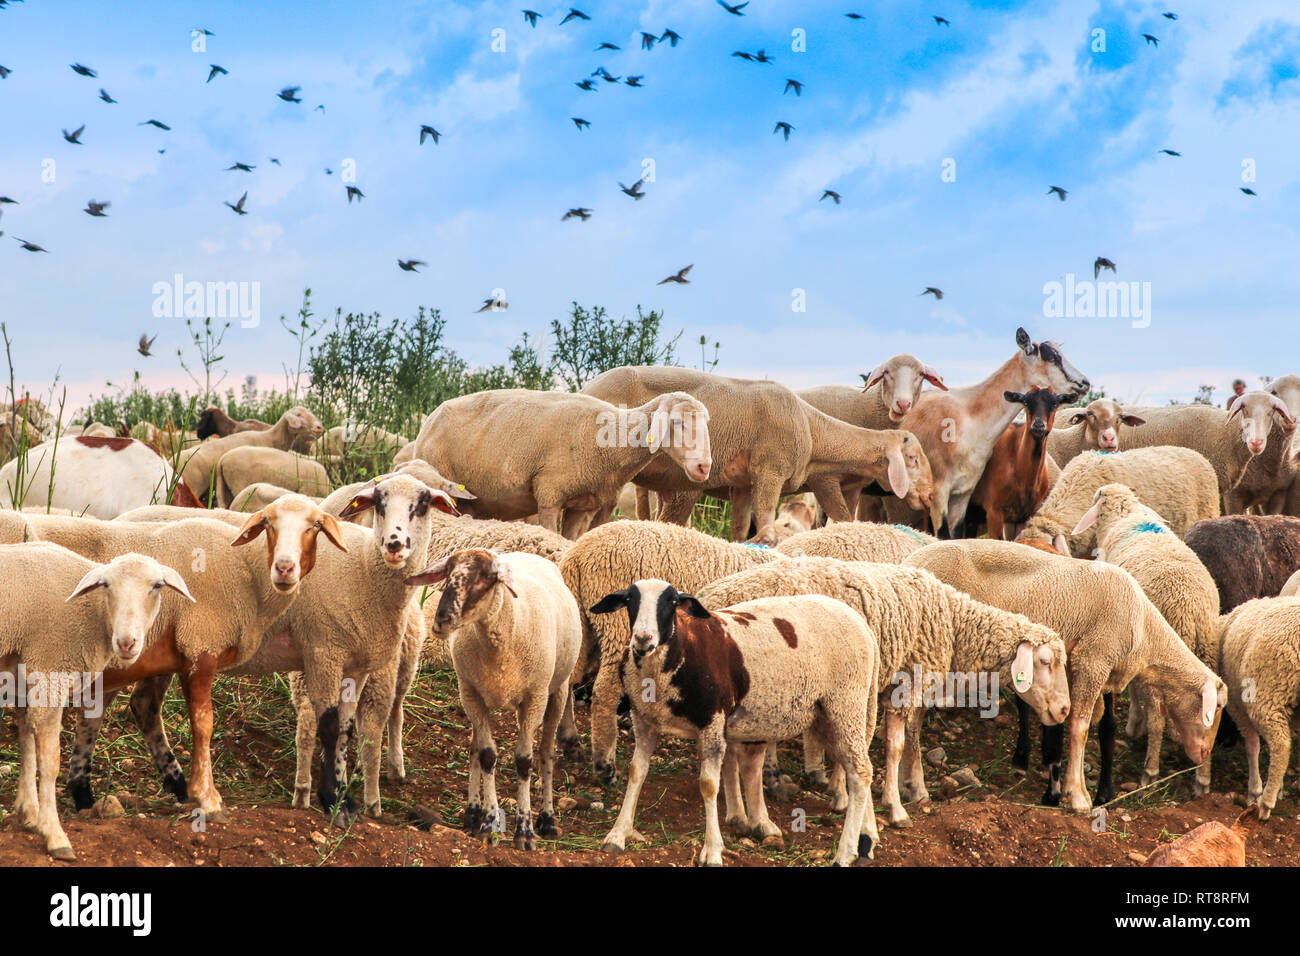 Many sheep standing in row with bird in blue sky background Stock Photo